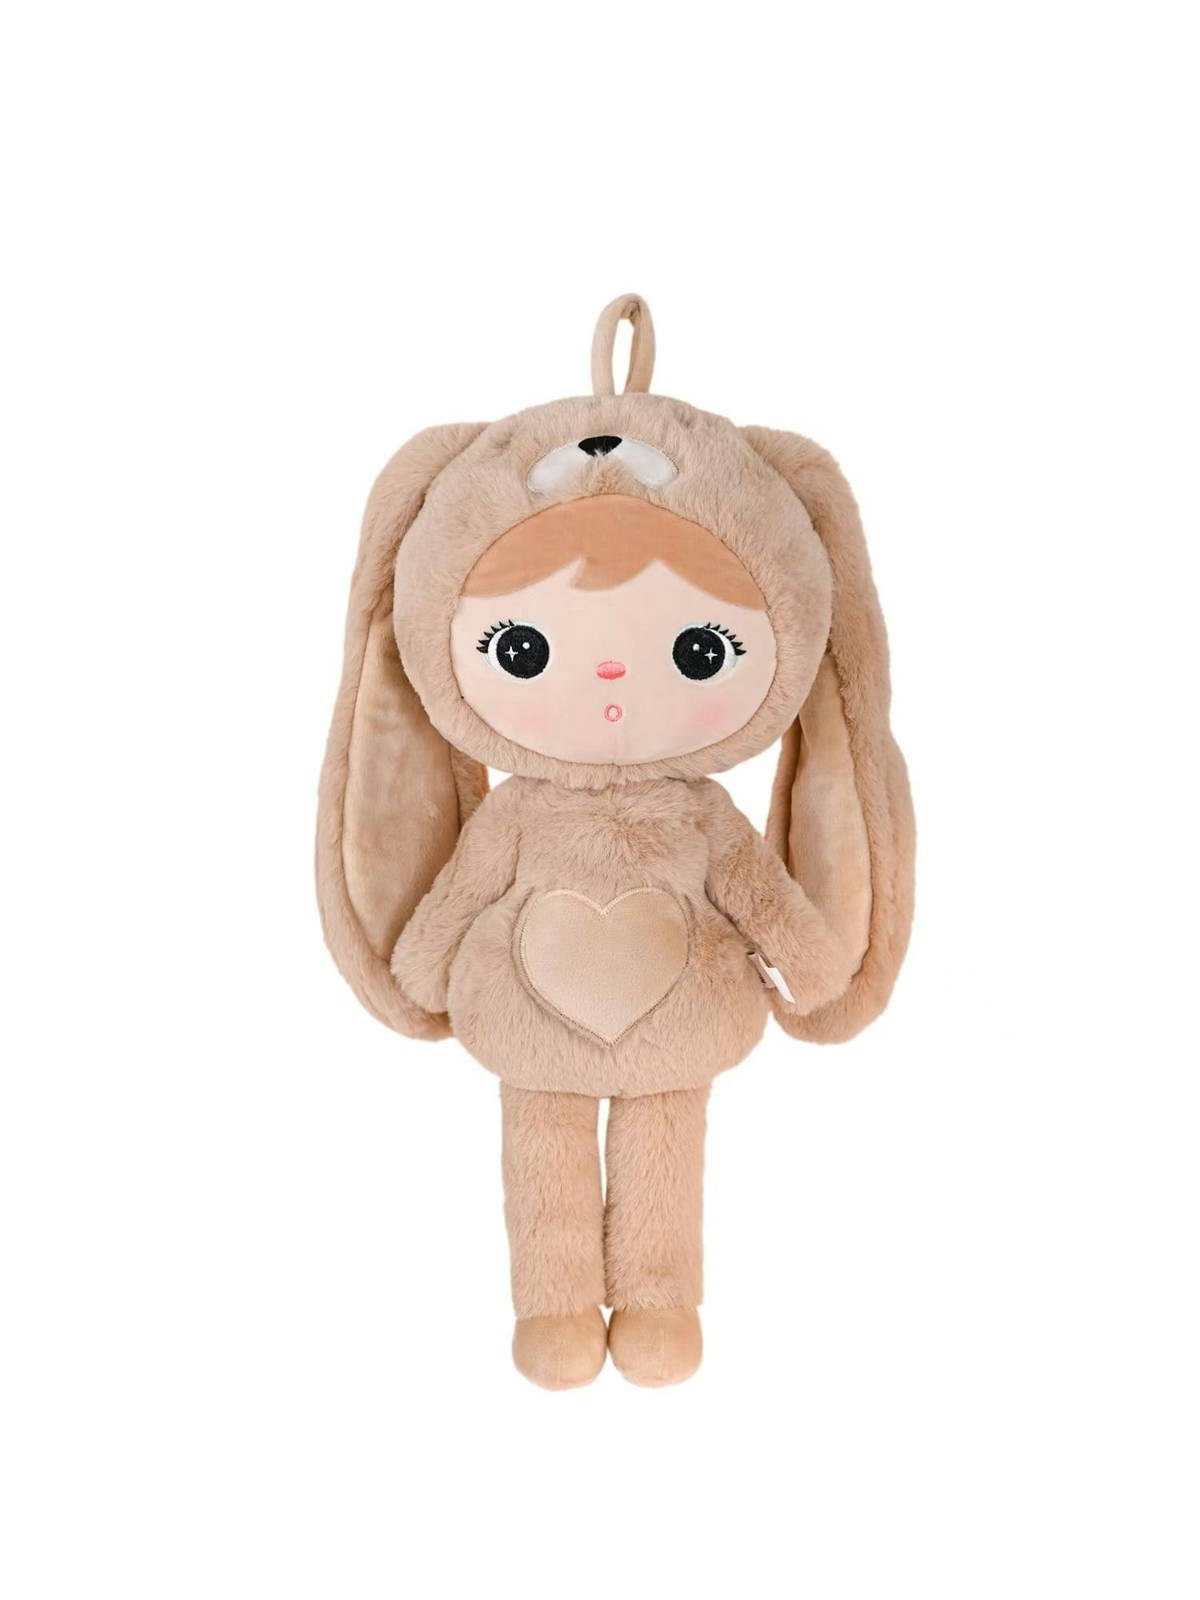 Caramel rabbit, large doll with name 